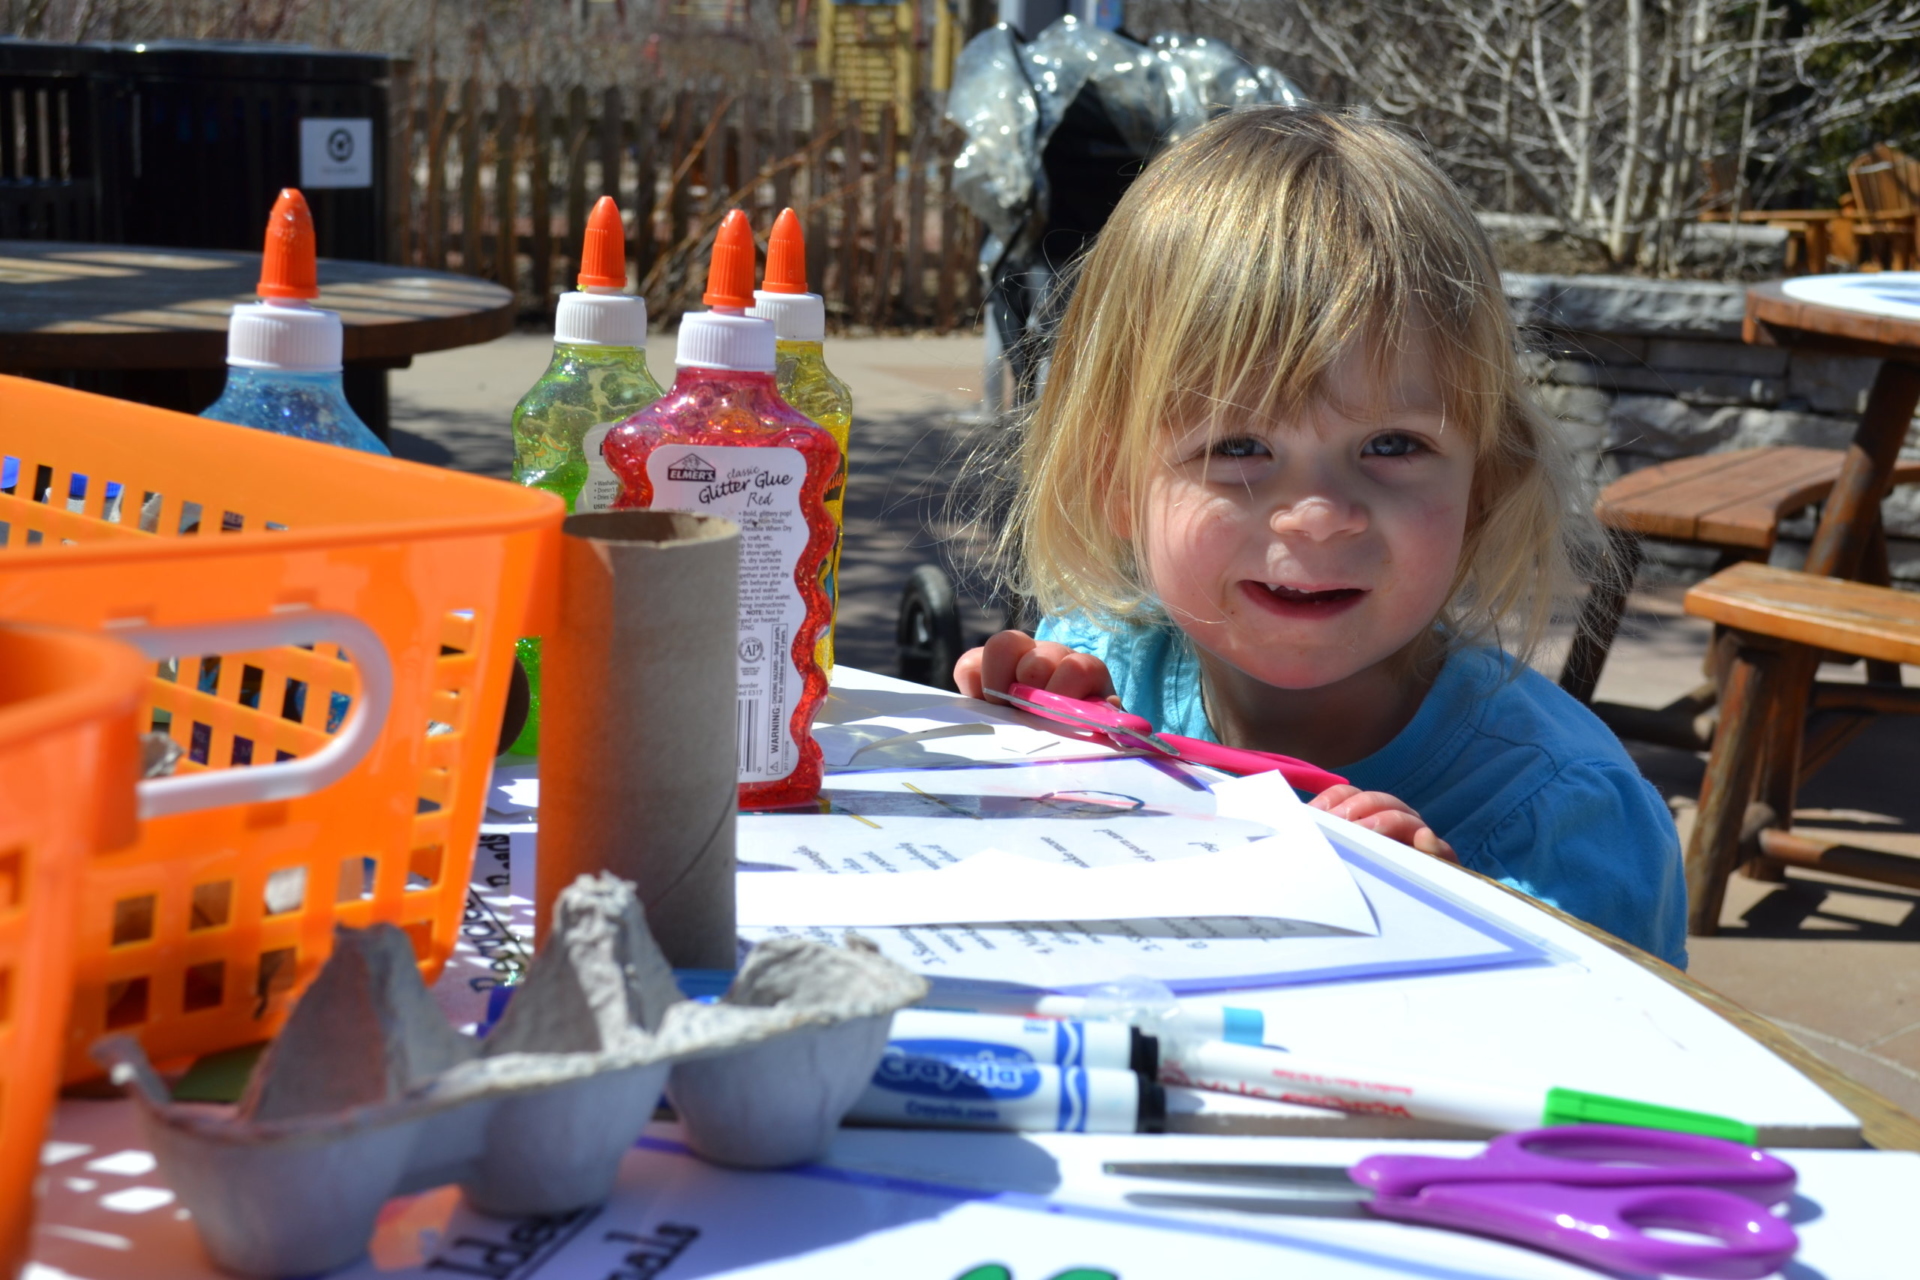 A little girl sitting at a table full of art supplies in the children's garden.